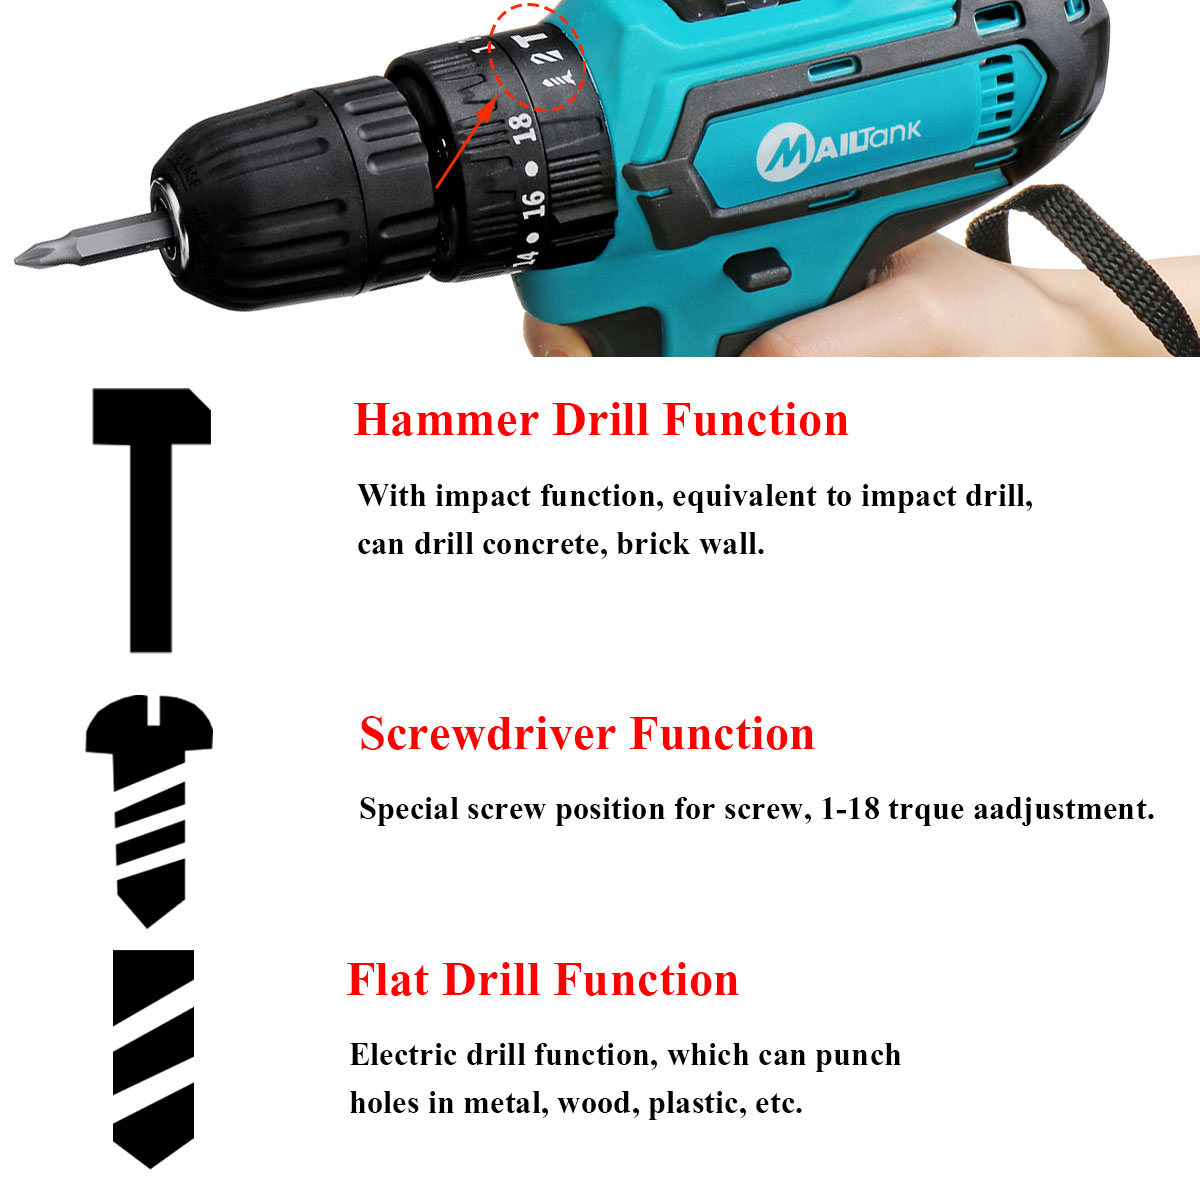 32V 2 Speed Power Drills 6000mah Cordless Drill 3 IN1 Electric Screwdriver Hammer Hand Drill 2 Batteries 16